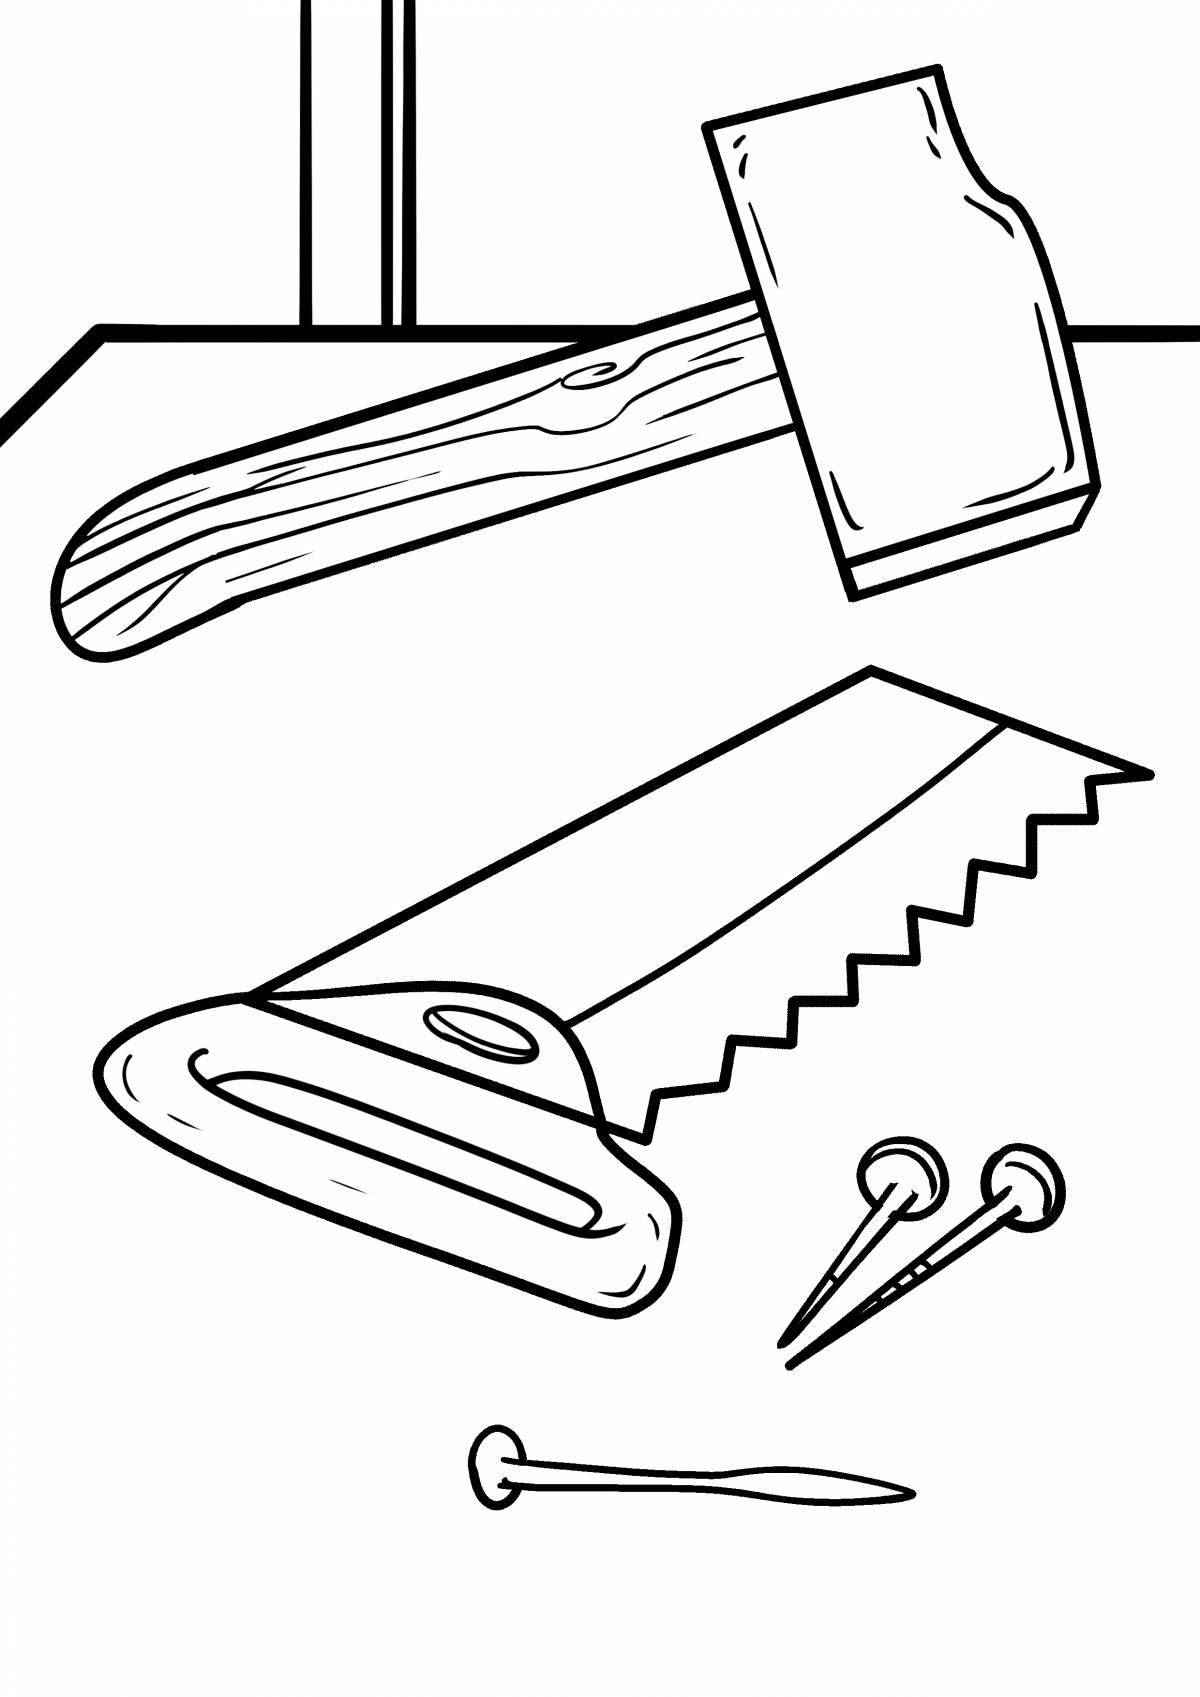 Creative tools coloring page for kids